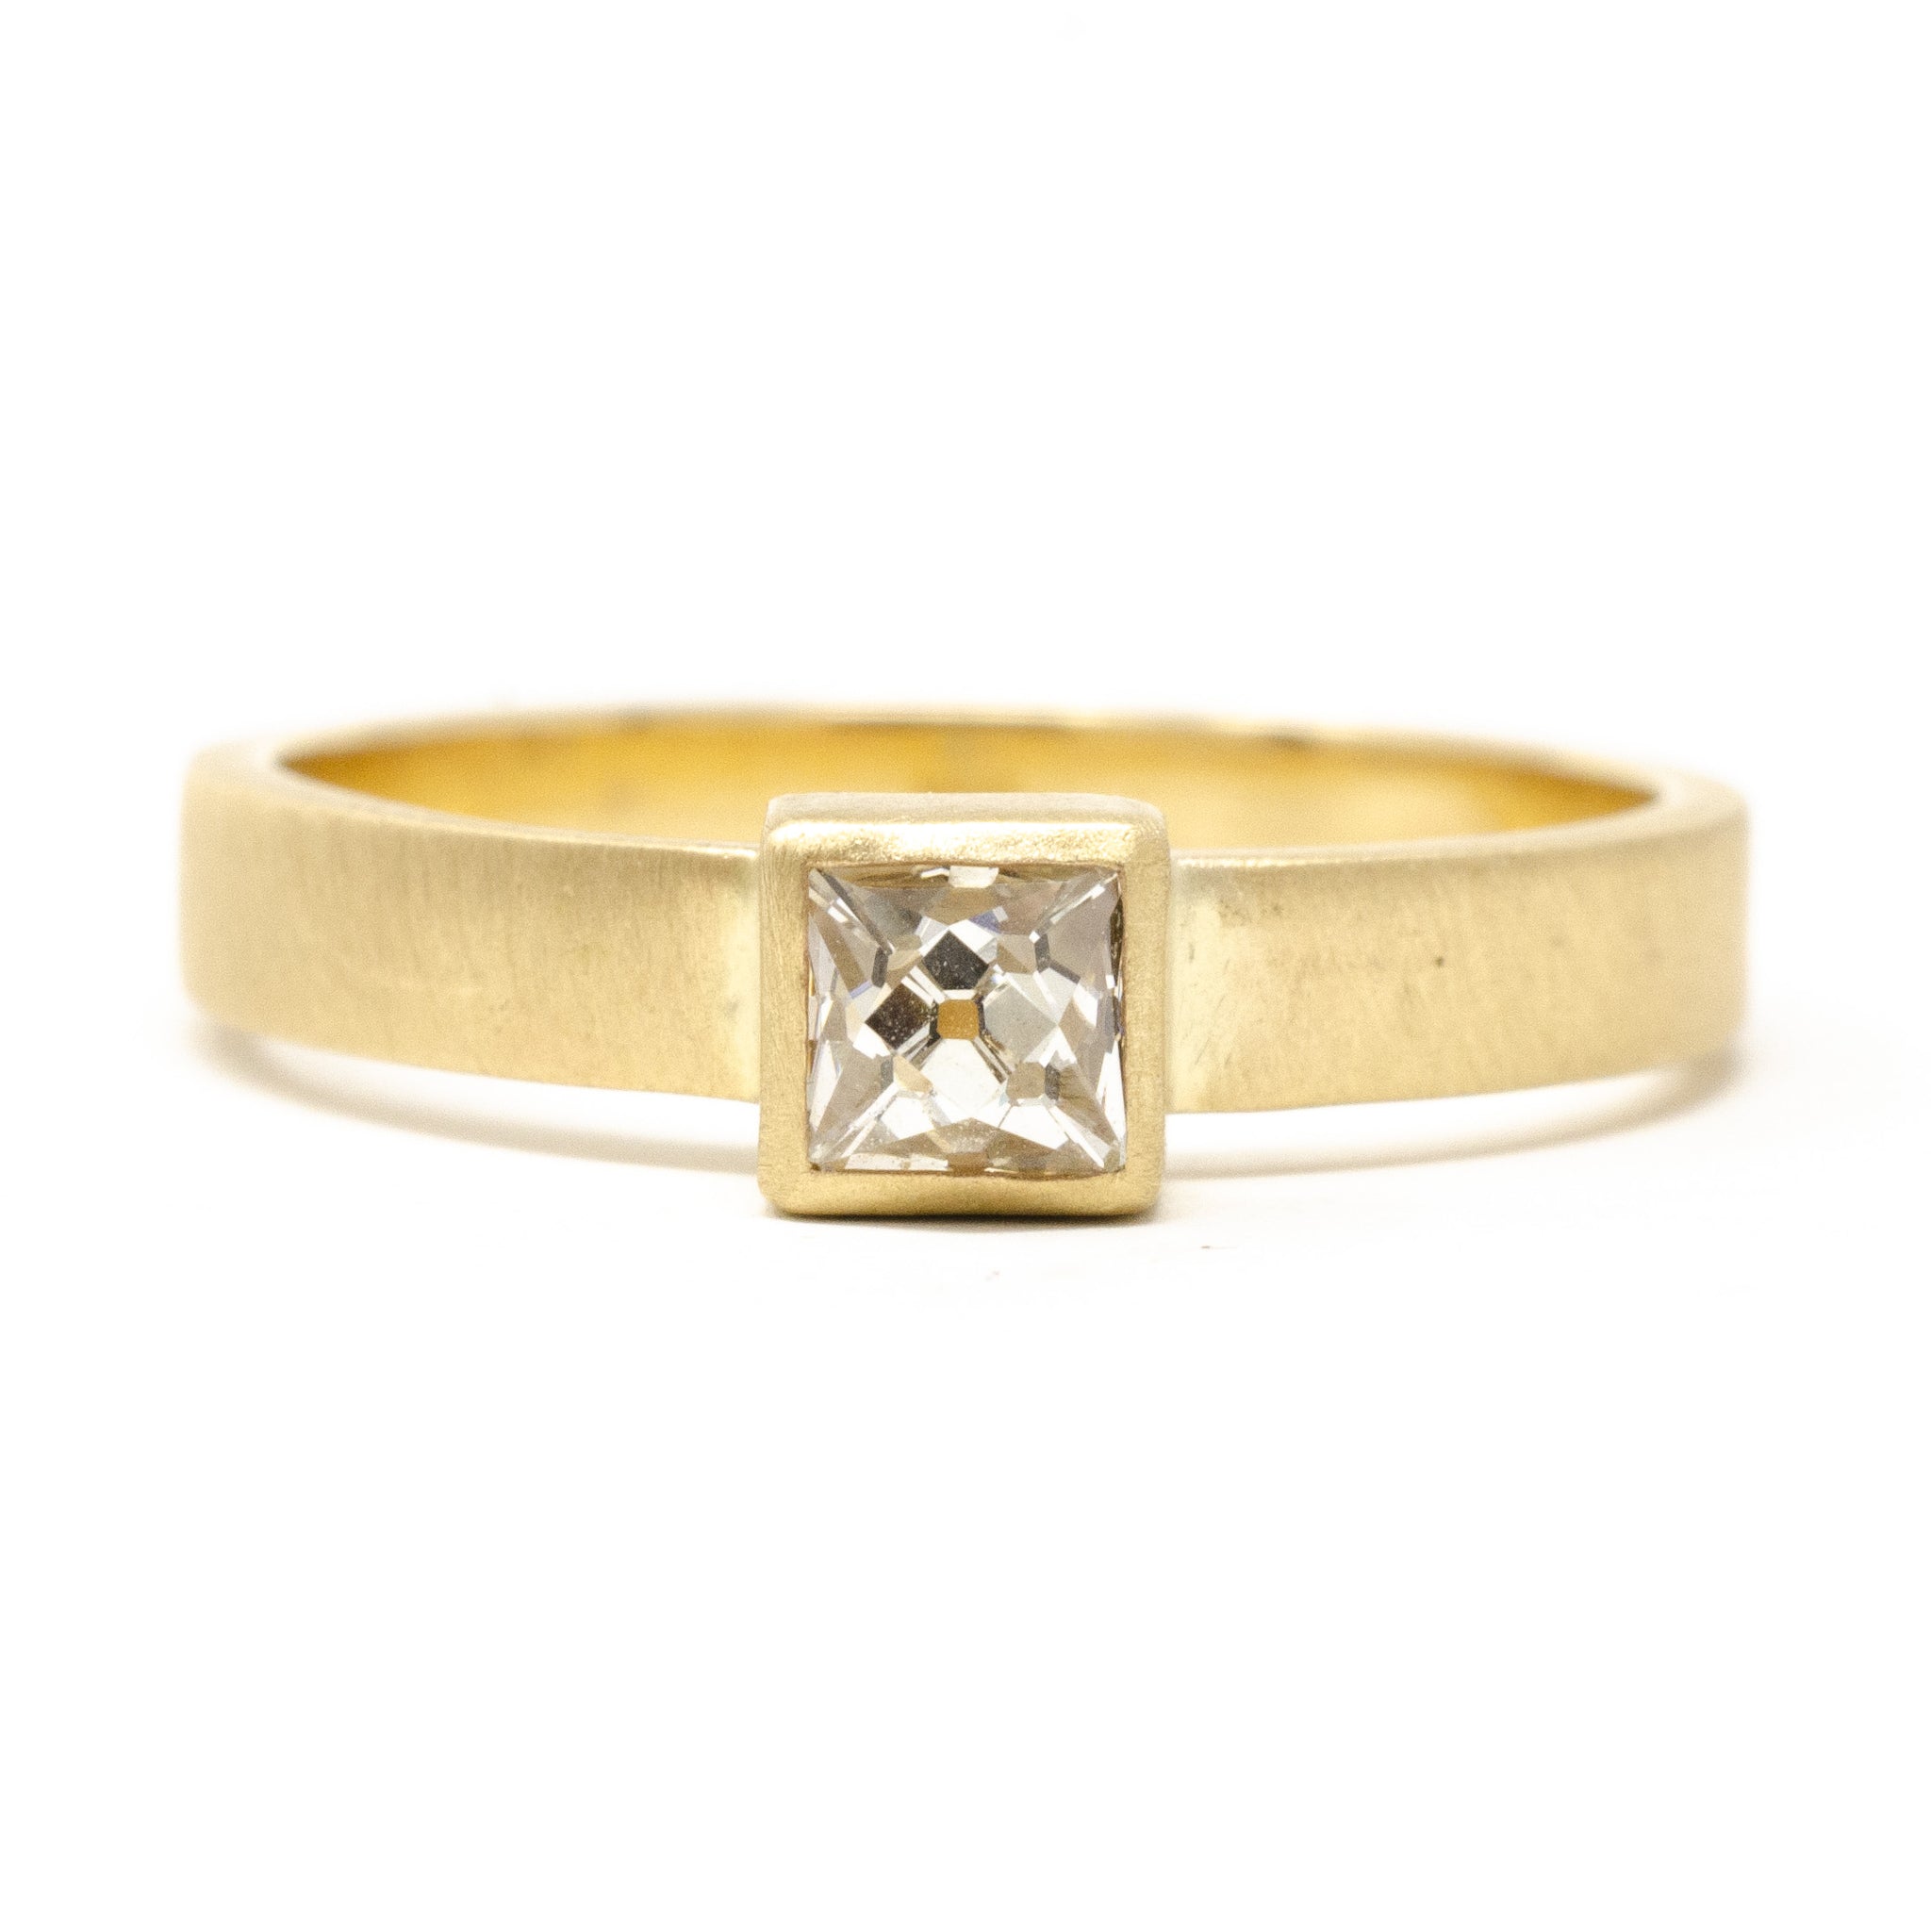 Solitaire Diamond Ring Sketch - SK1049 – JEWELLERY GRAPHICS